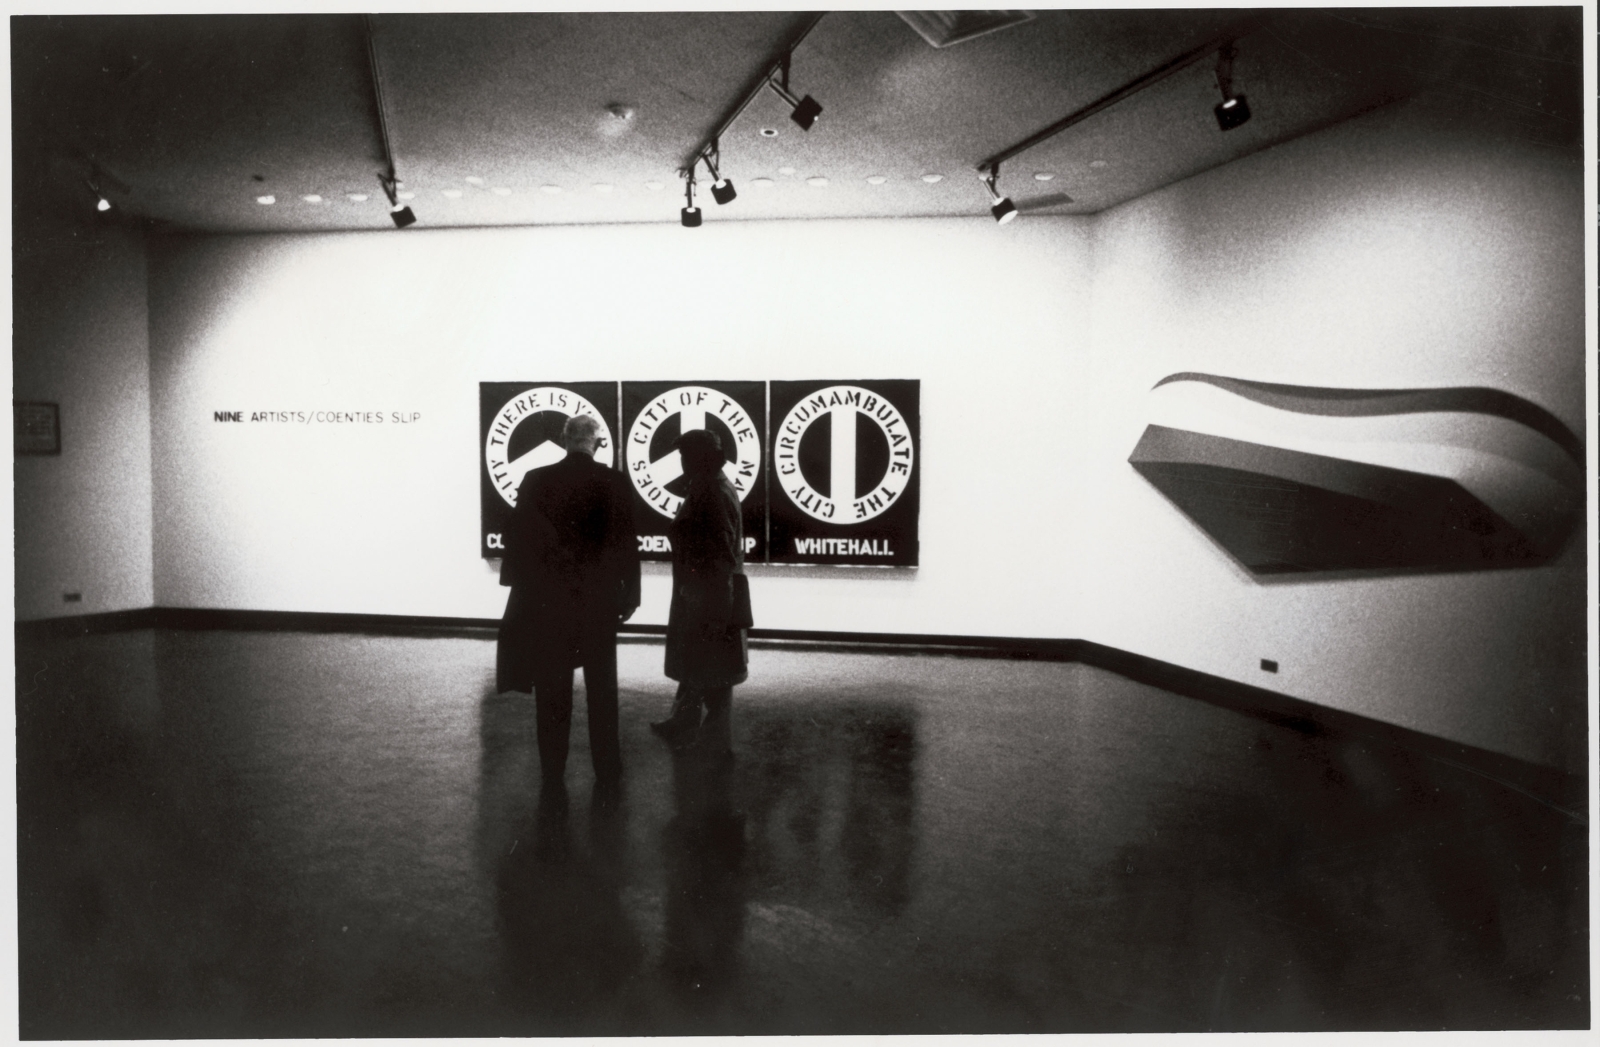 Installation view of Indiana&amp;rsquo;s The Melville Triptych (1961) and Charles Hinman&amp;rsquo;s Lift (1965) in the exhibition Nine Artists: Coenties Slip at the Whitney Museum of American Art Downtown, New York, January 10&amp;ndash;February 14, 1974. Image courtesy of The Star of Hope, Vinalhaven, Maine